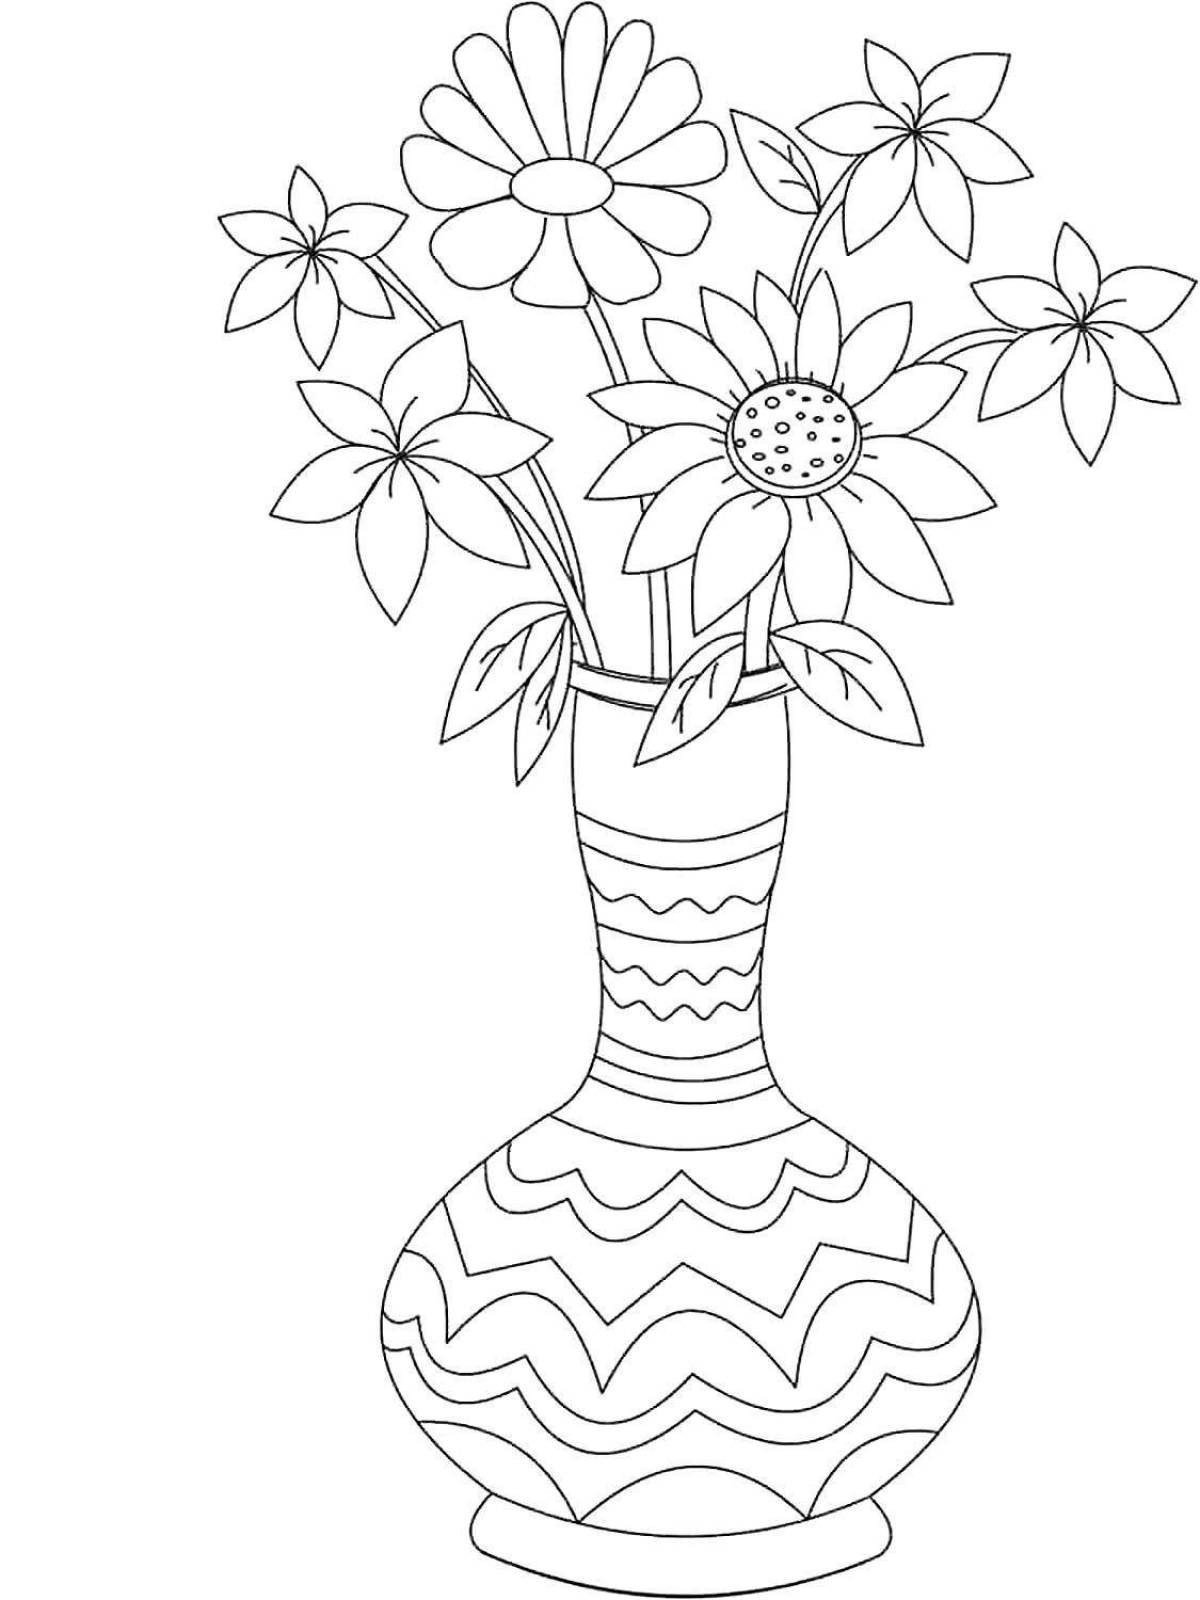 Colorful vase with flowers coloring book for children 5-6 years old